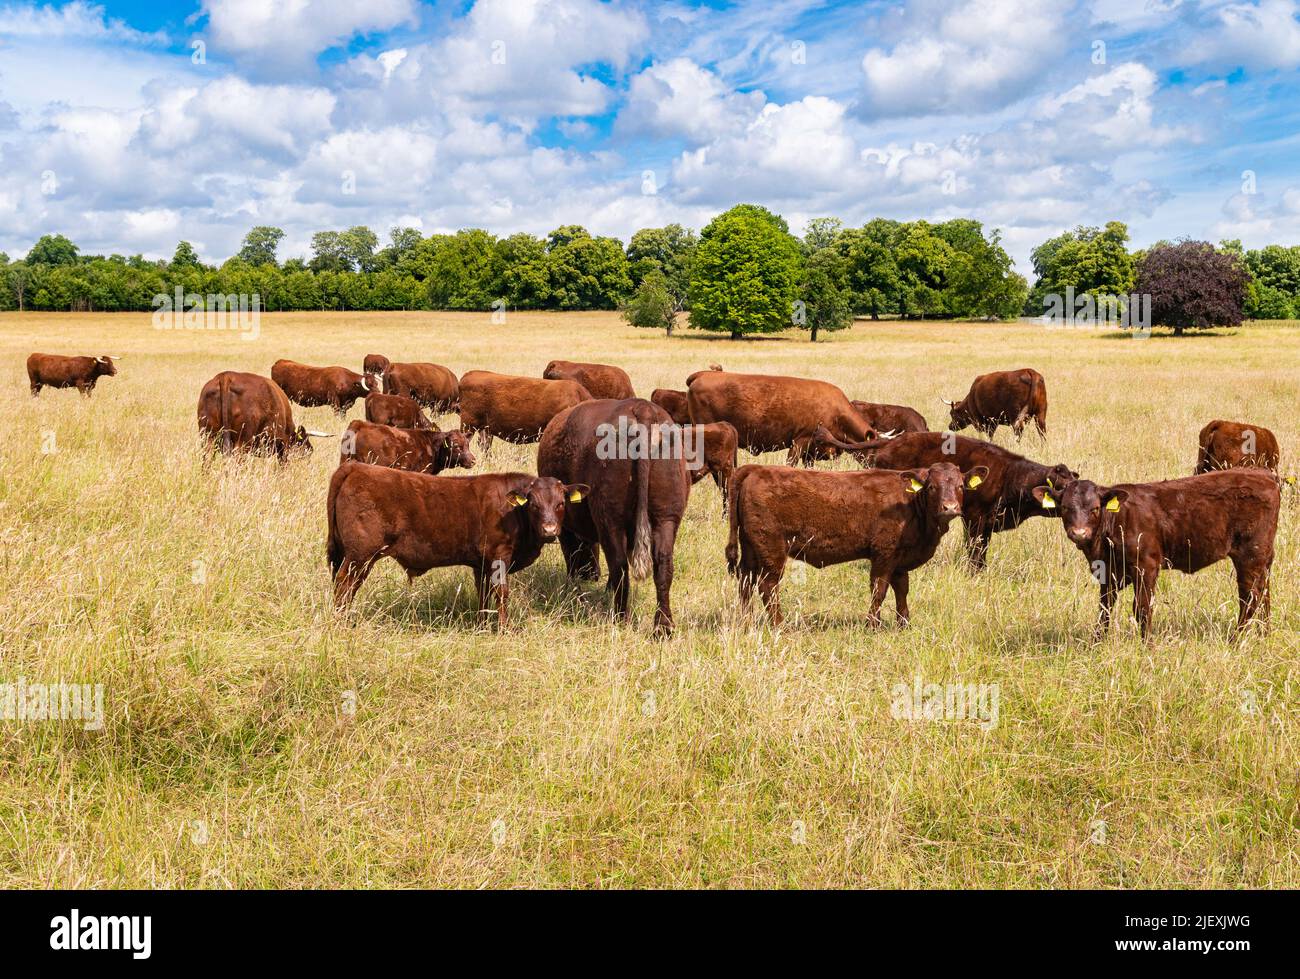 Red Ruby Devons or North Devon cows grazing in the field on a sunny and cloudy day in a open field with tall dried grasses in the Dorset countryside. Stock Photo